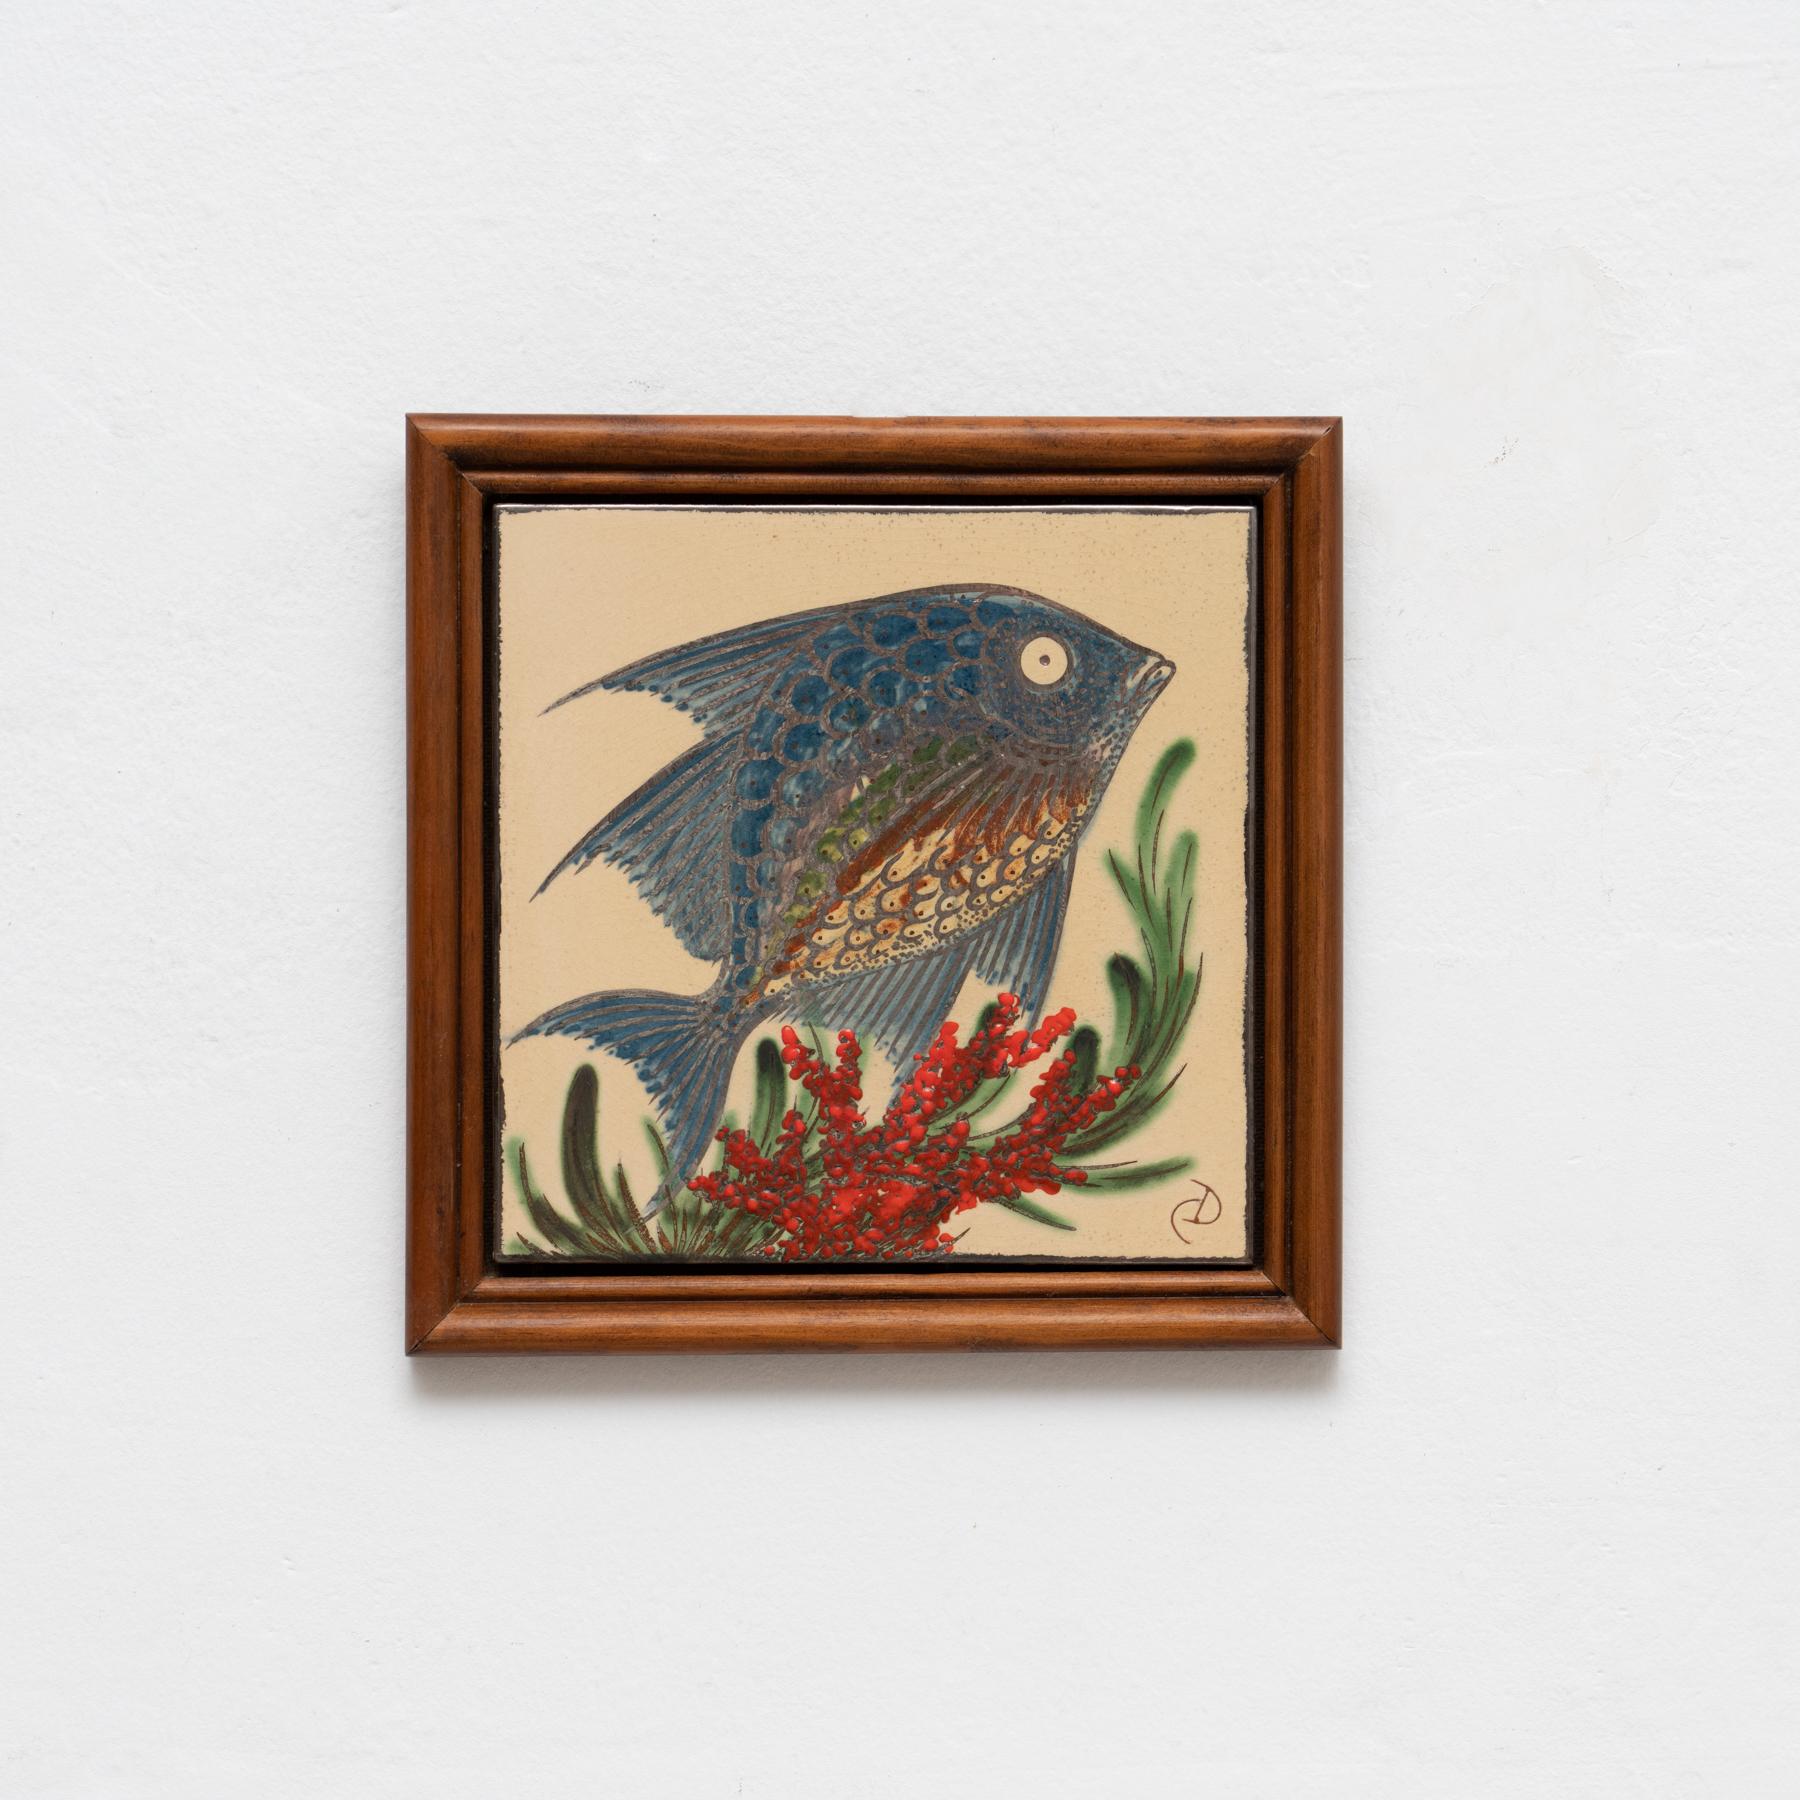 Ceramic hand painted artwork of a fish by Catalan artist Diaz Costa, circa 1960.
Framed. Signed.

In original condition, with minor wear consistent of age and use, preserving a beautiul patina.